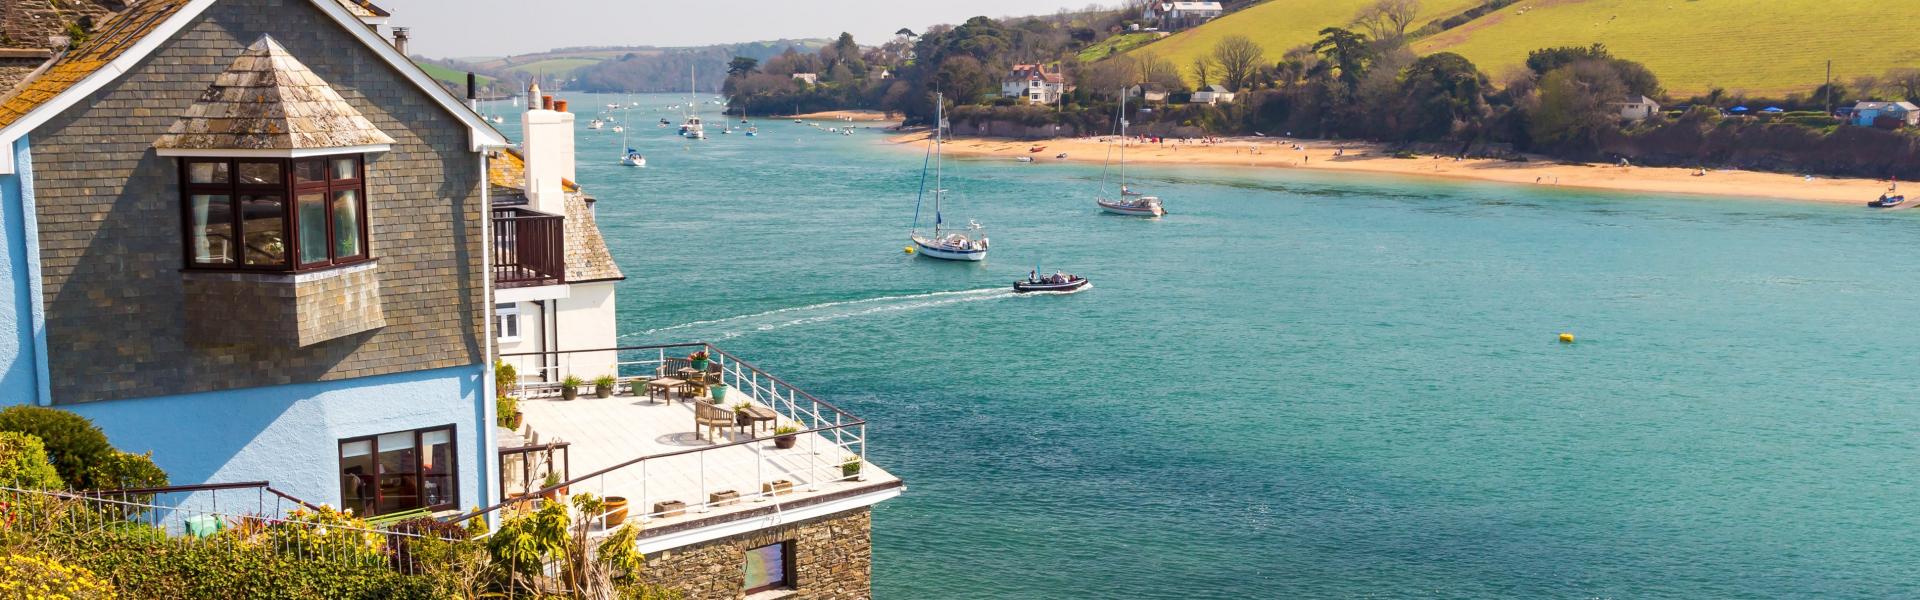 Holiday Homes & Cottages in Salcombe - HomeToGo